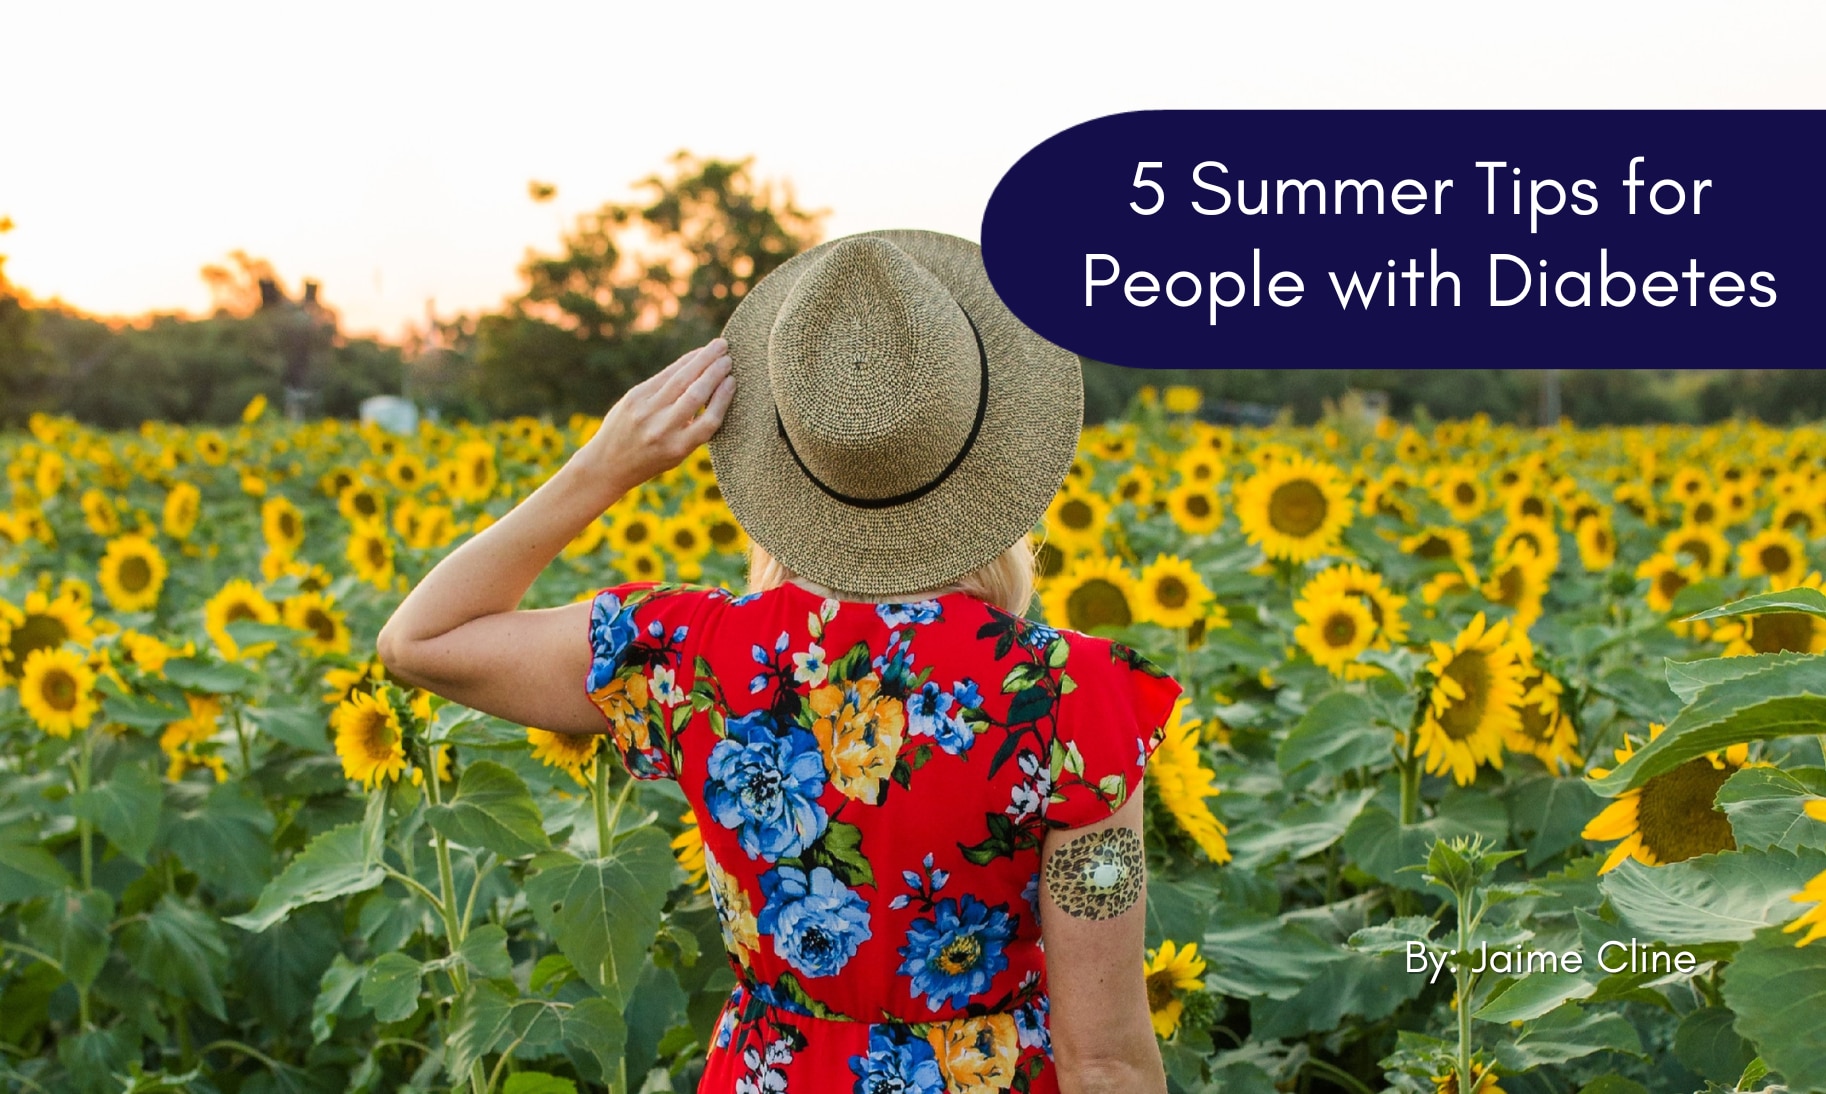 5 Summer Tips for People with Diabetes